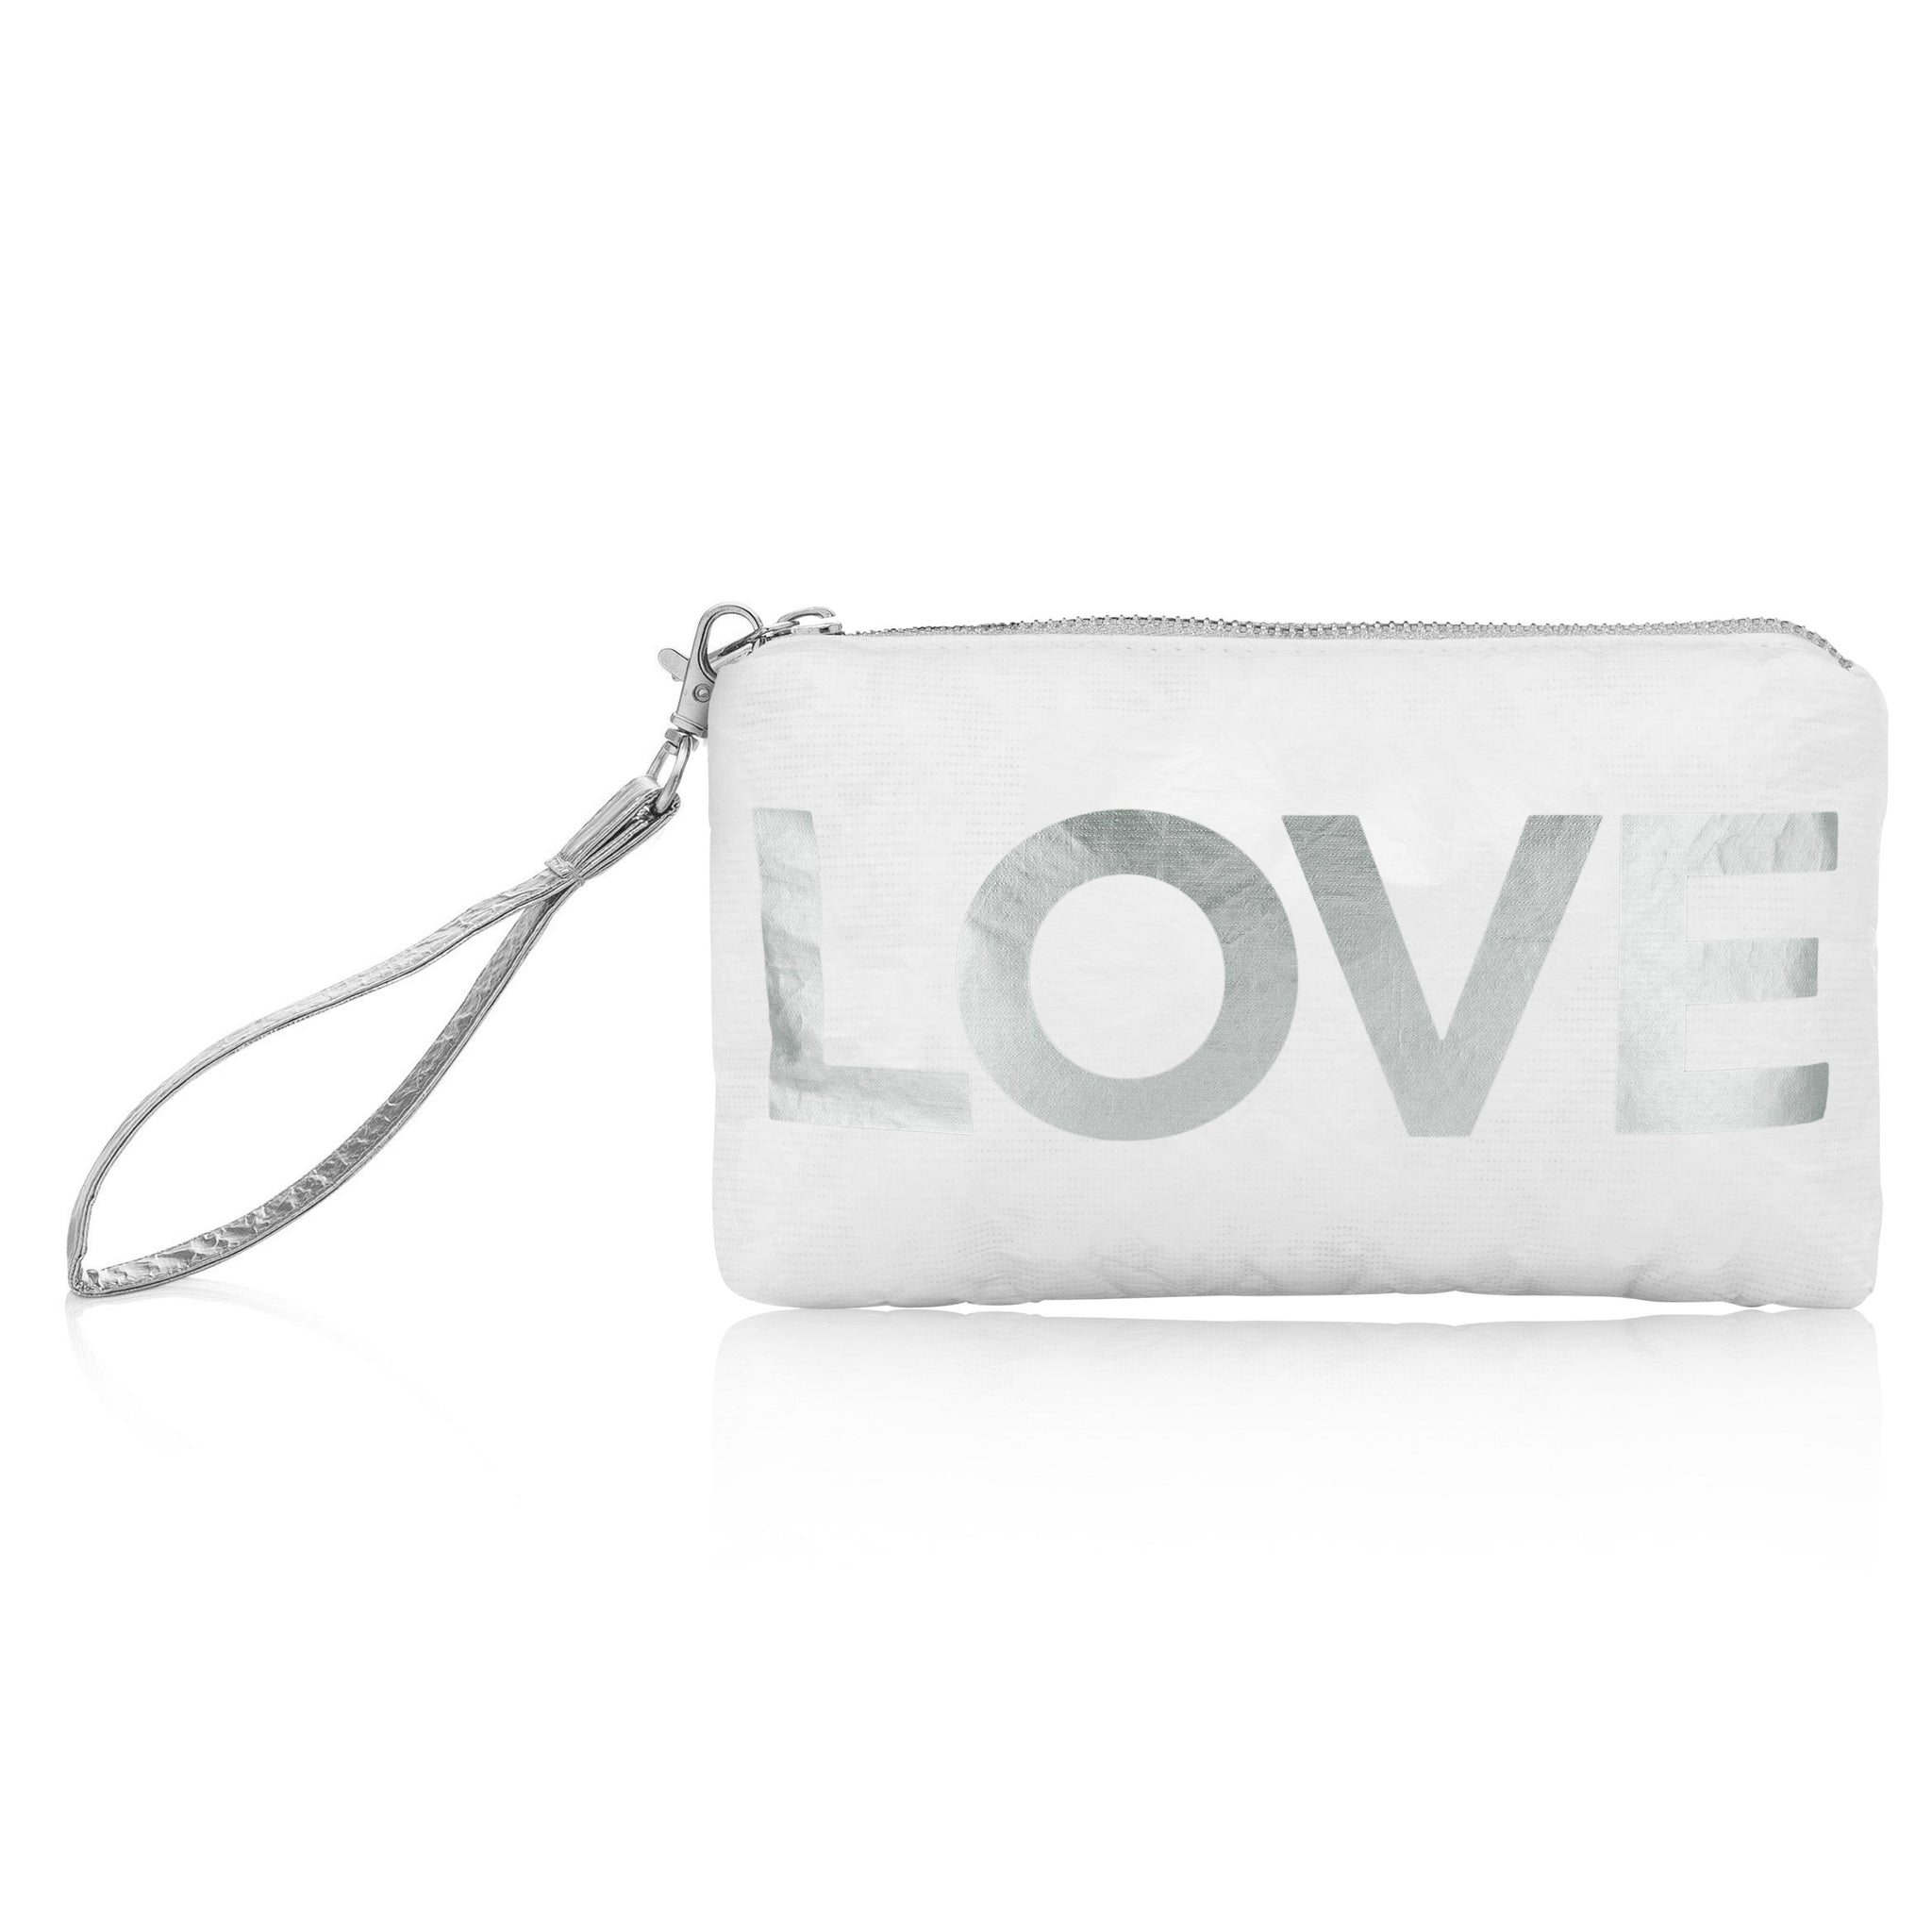 Zip wristlet in shimmer white with silver  "LOVE" with a detachable wrist strap